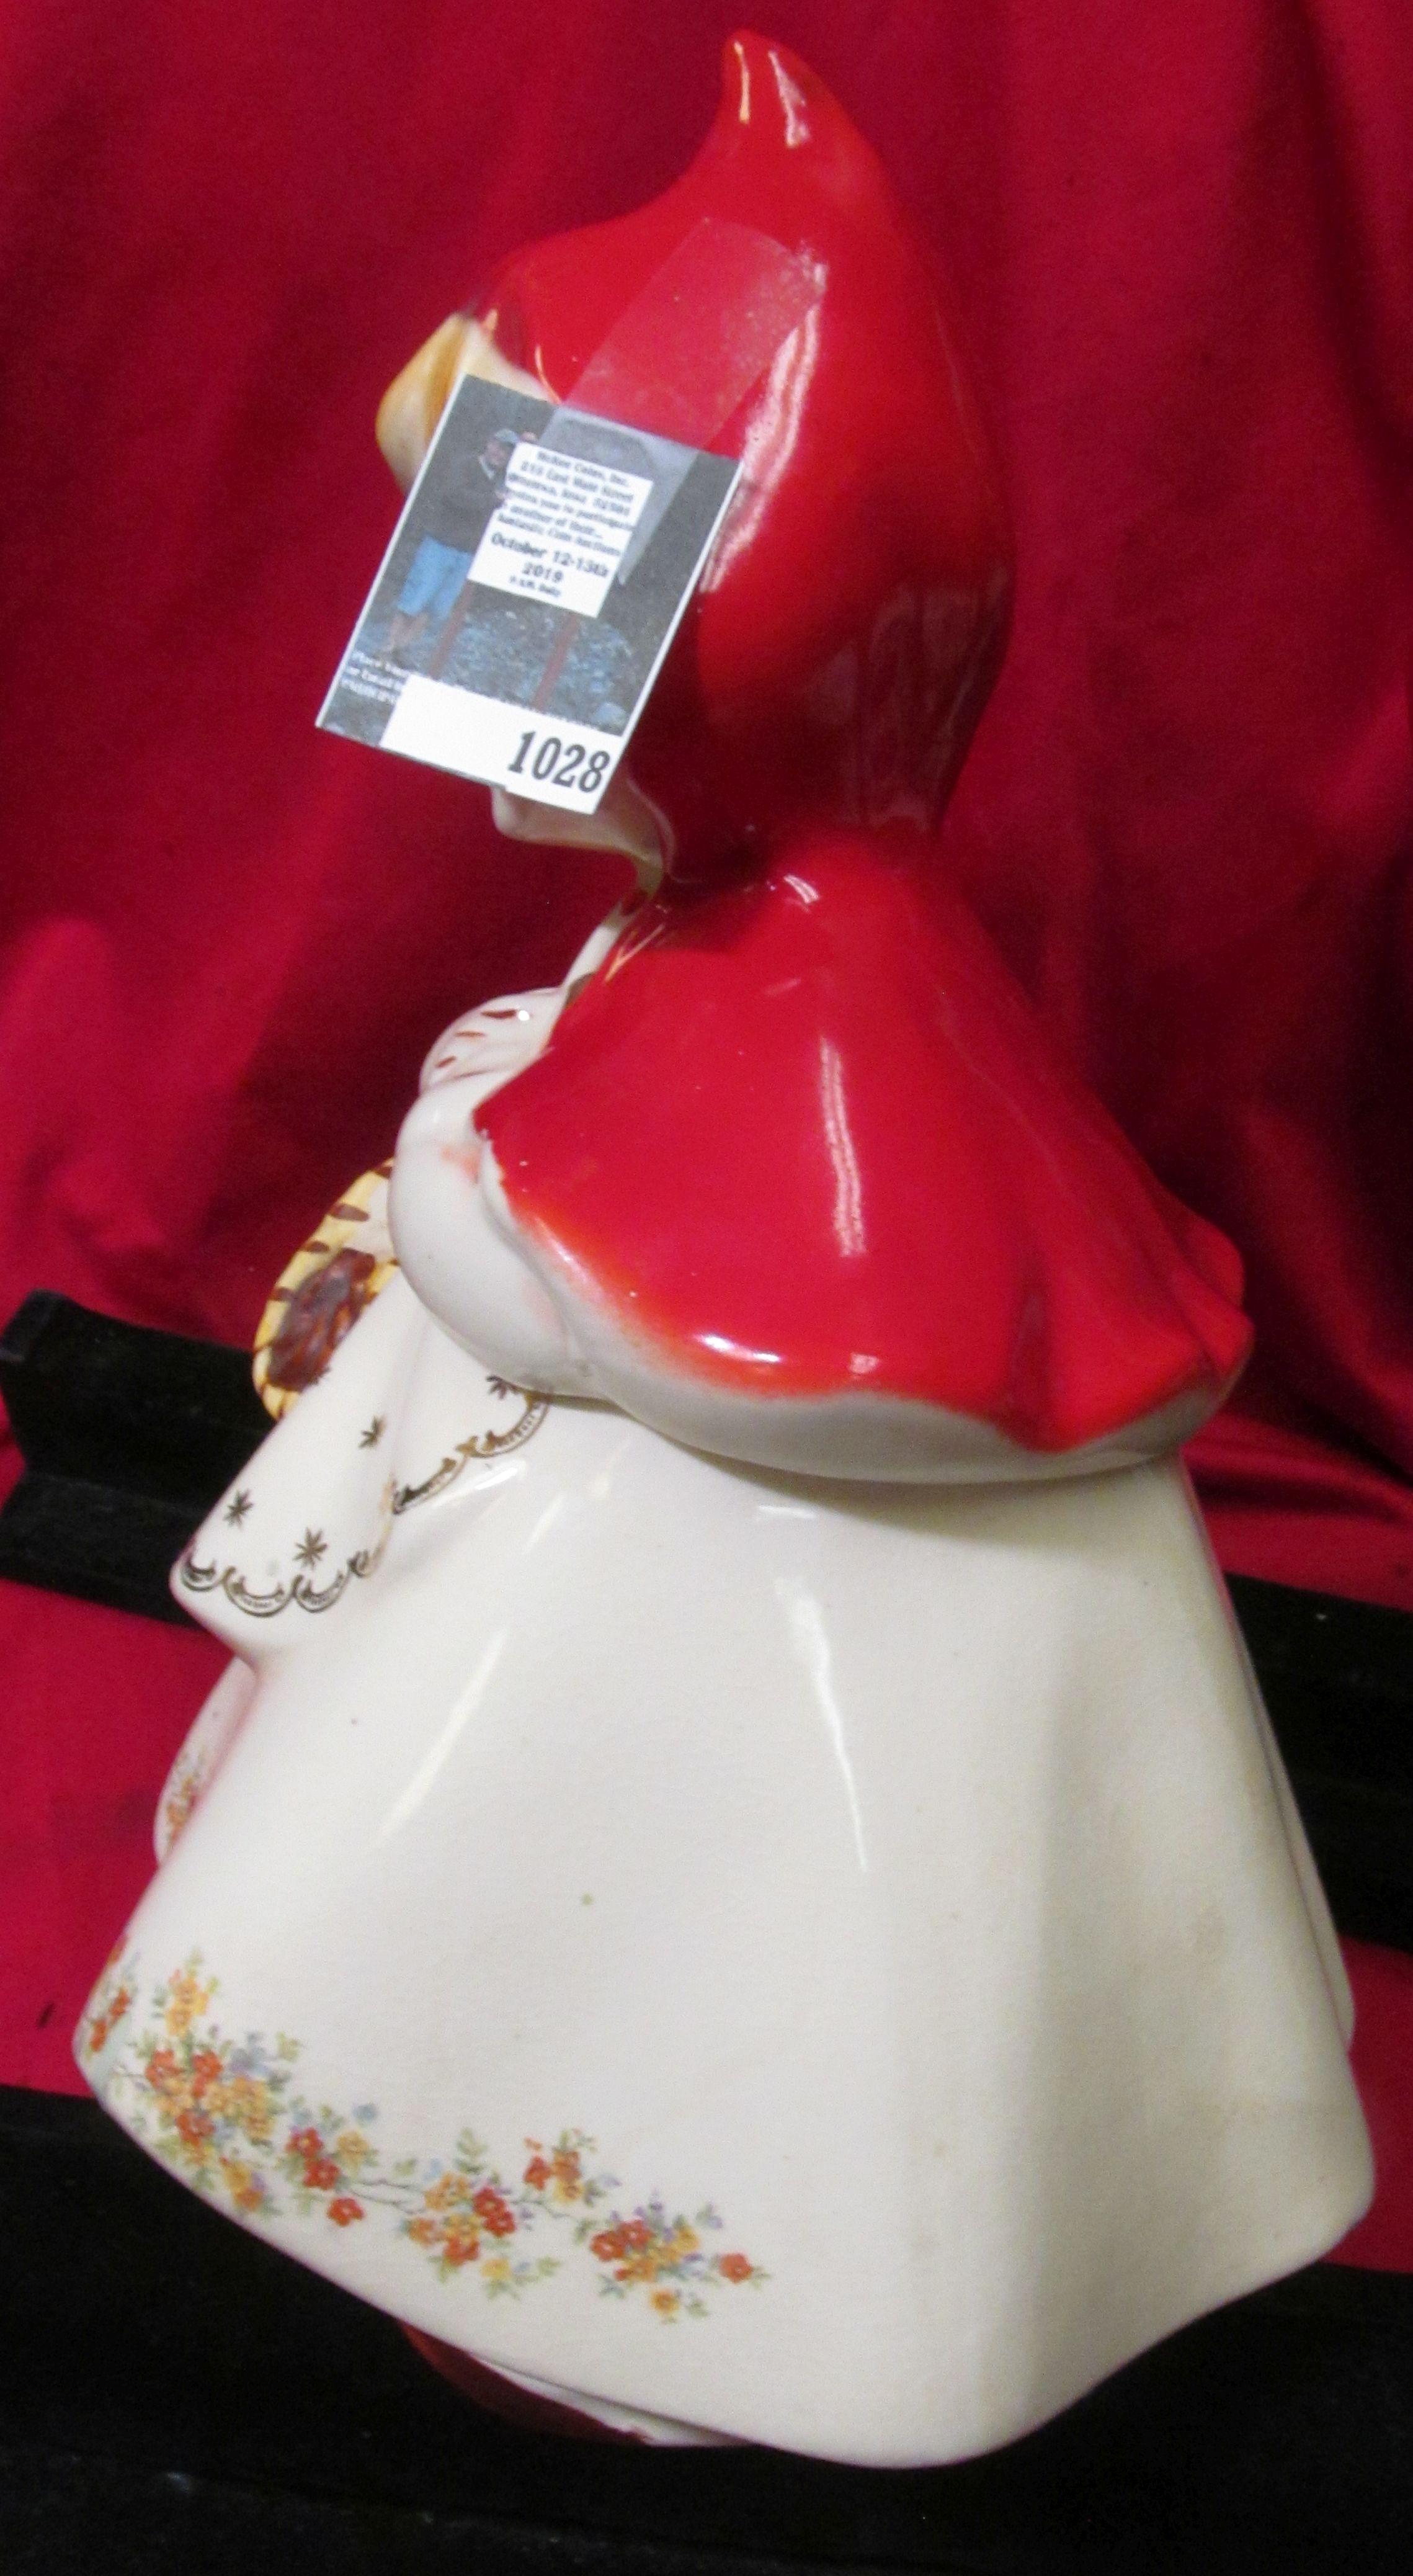 "967 Hull Ware Little Red Riding Hood Patent Applied For U.S.A." Cookie jar with a large assortment